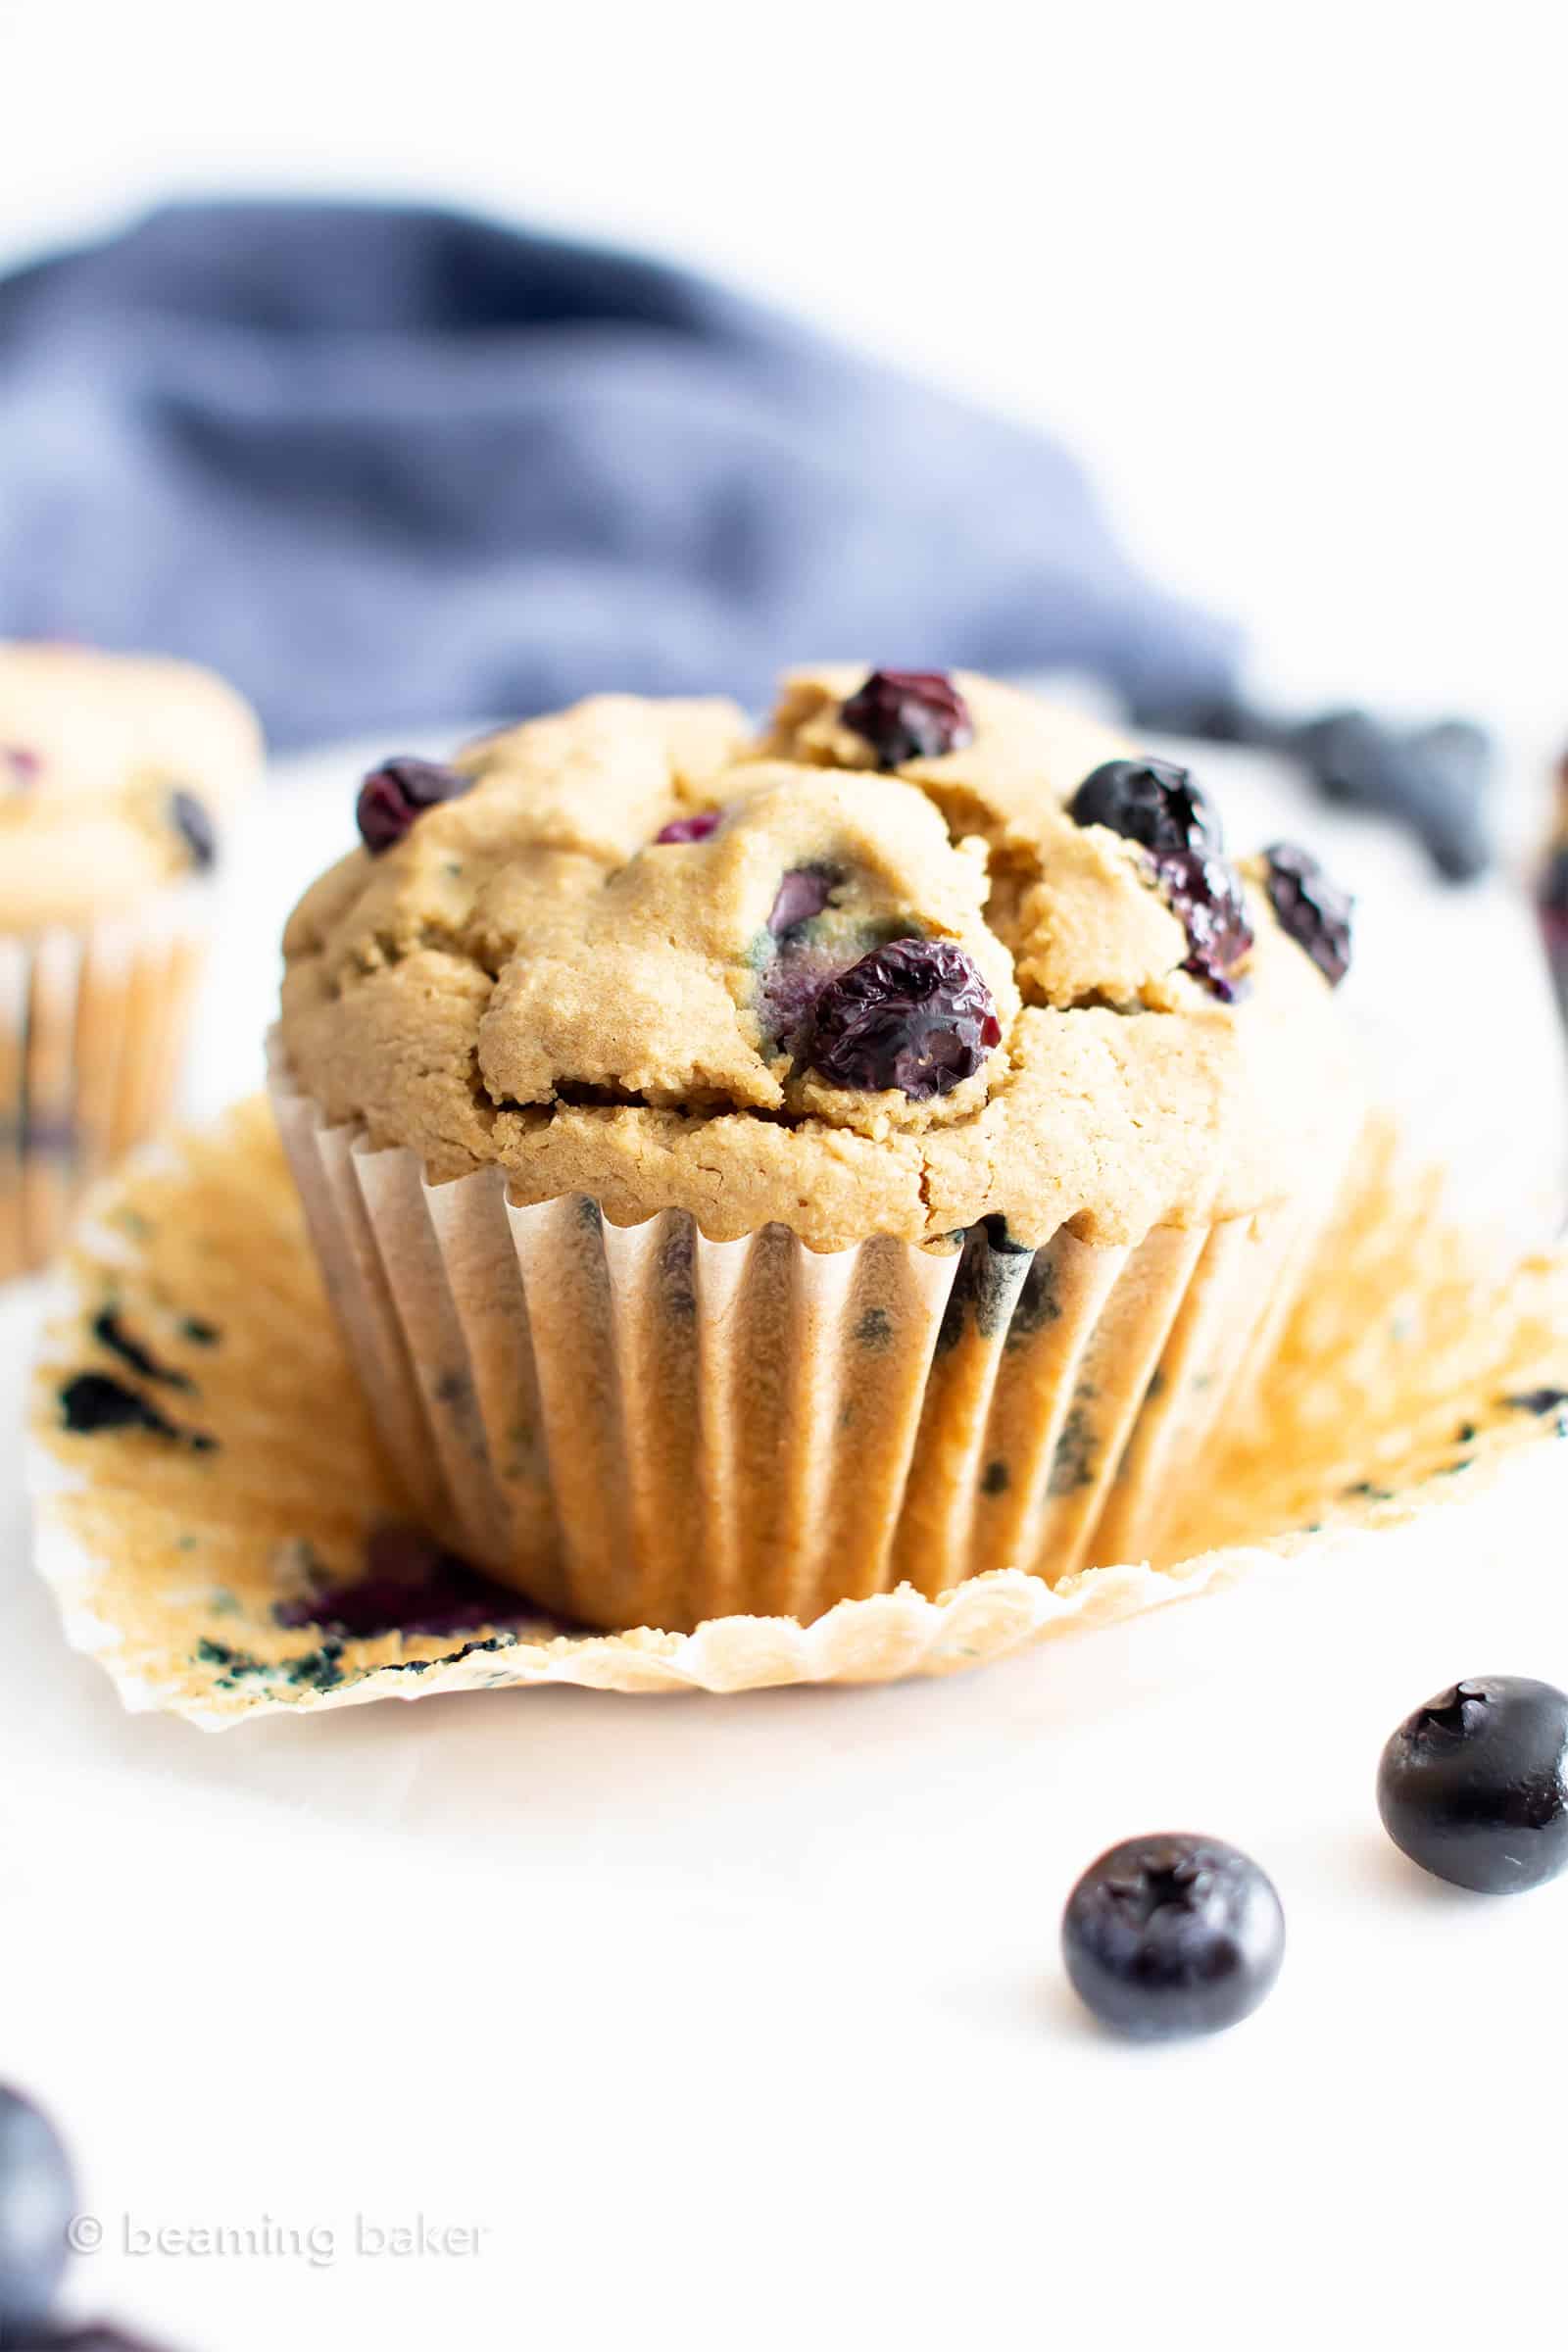 25+ Absolute Best Vegan Muffins: an irresistibly mouthwatering collection of the best vegan muffins! Including vegan banana muffins, vegan pumpkin muffins, vegan chocolate chip muffins, and more! #veganmuffins #veganbananamuffins #vegan #muffins | Recipes on BeamingBaker.com